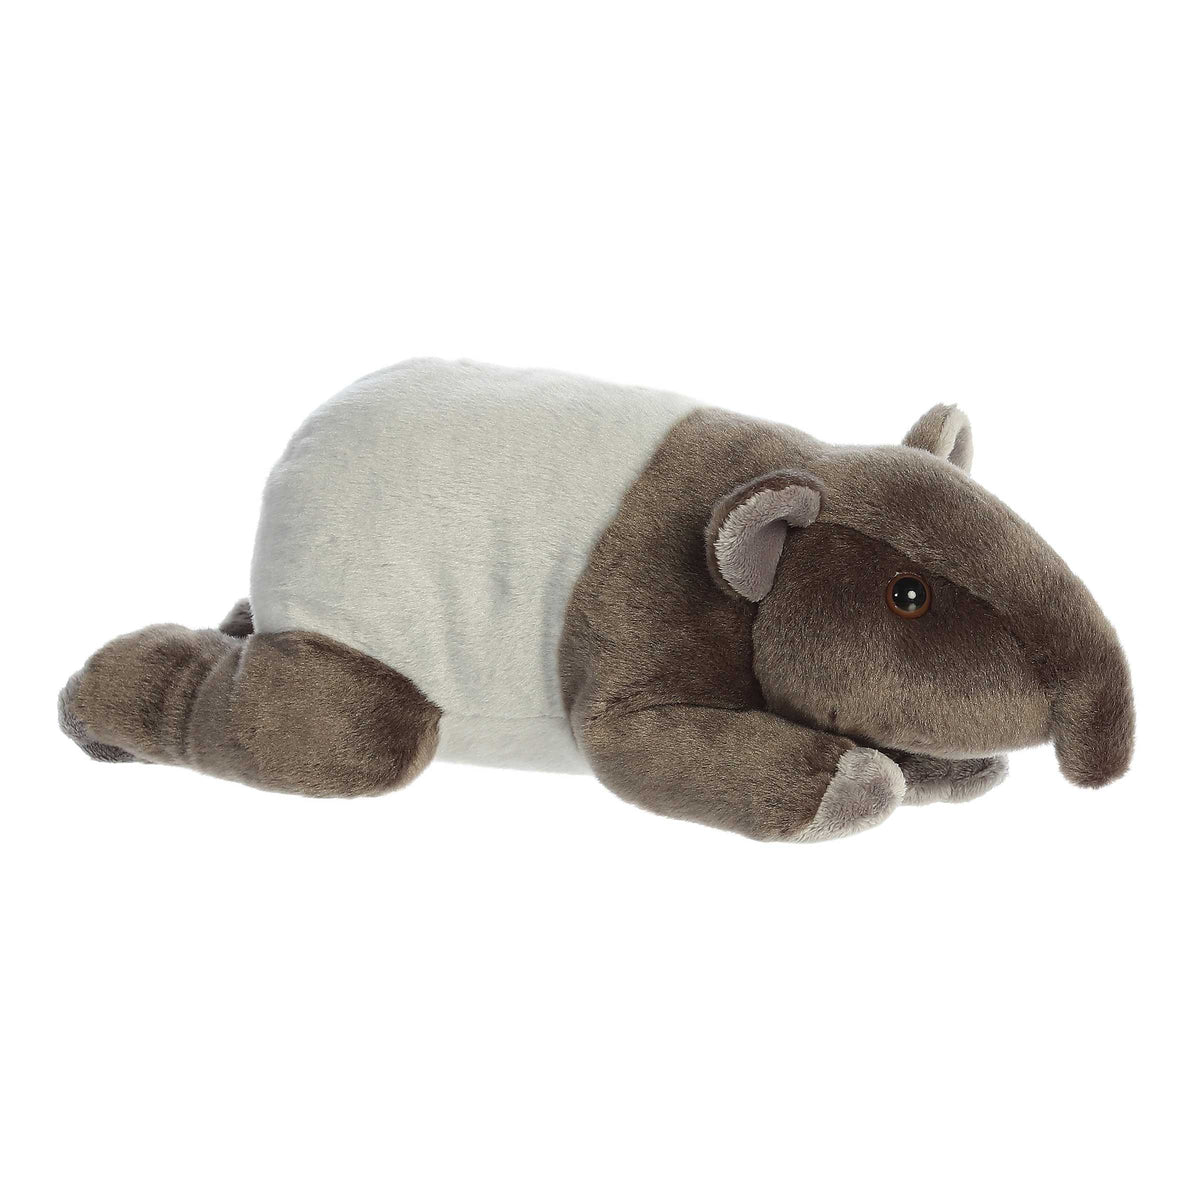 Soft grey Flopsie Tapir plush with authentic details, great for play or learning.